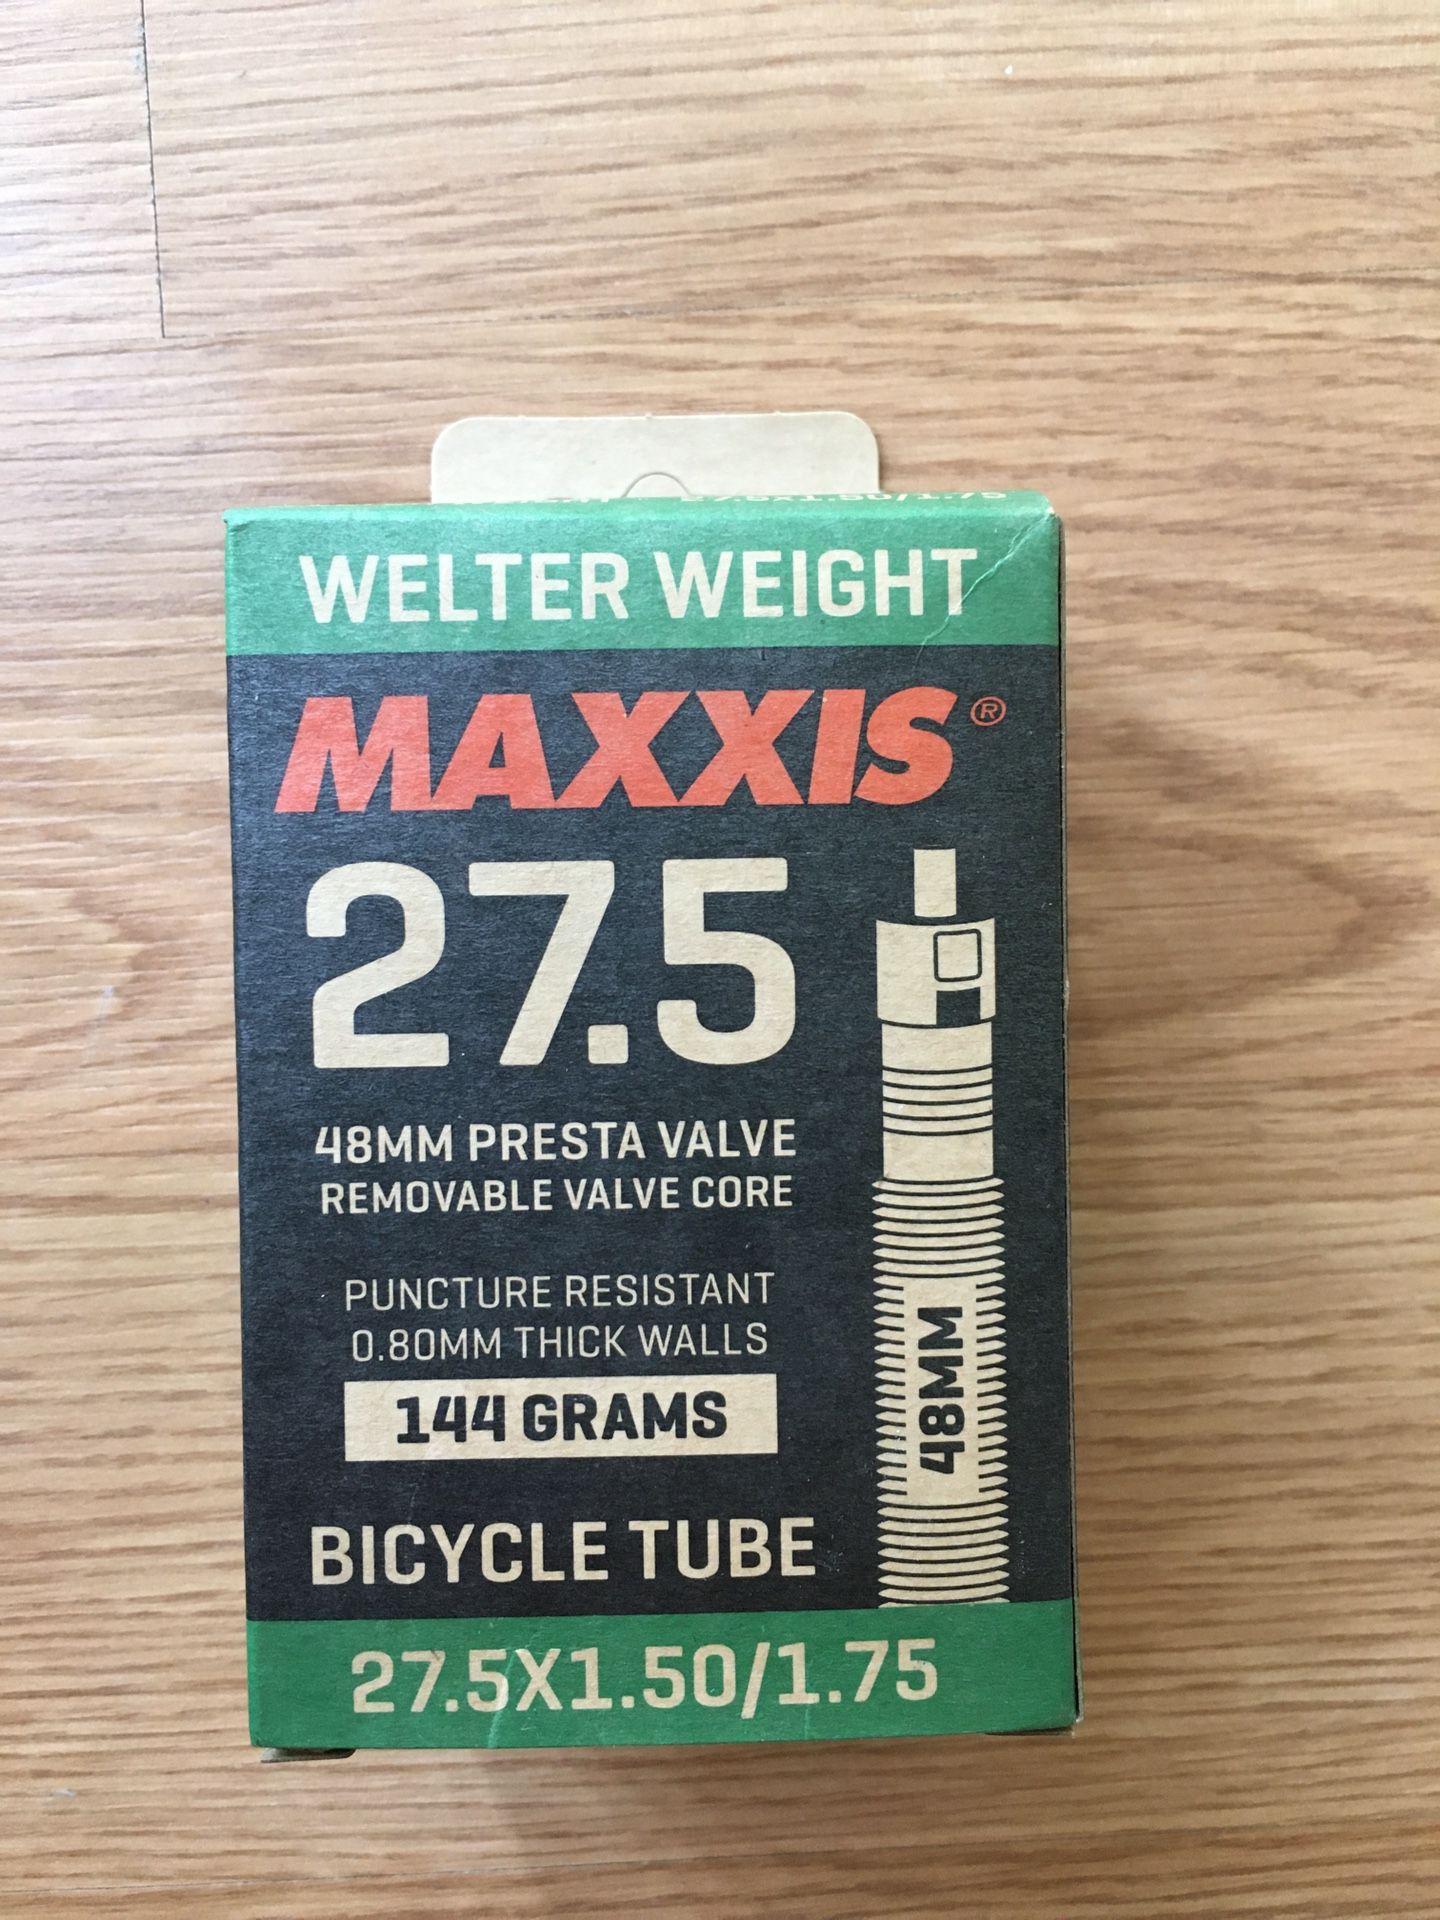 Bike Inner Tube - Maxis Wheel diameter - 27.5 / 650B Tire width 1.50 - 1.75 Presta Valve - Brand new  - If the listing is up and you can see it, that 